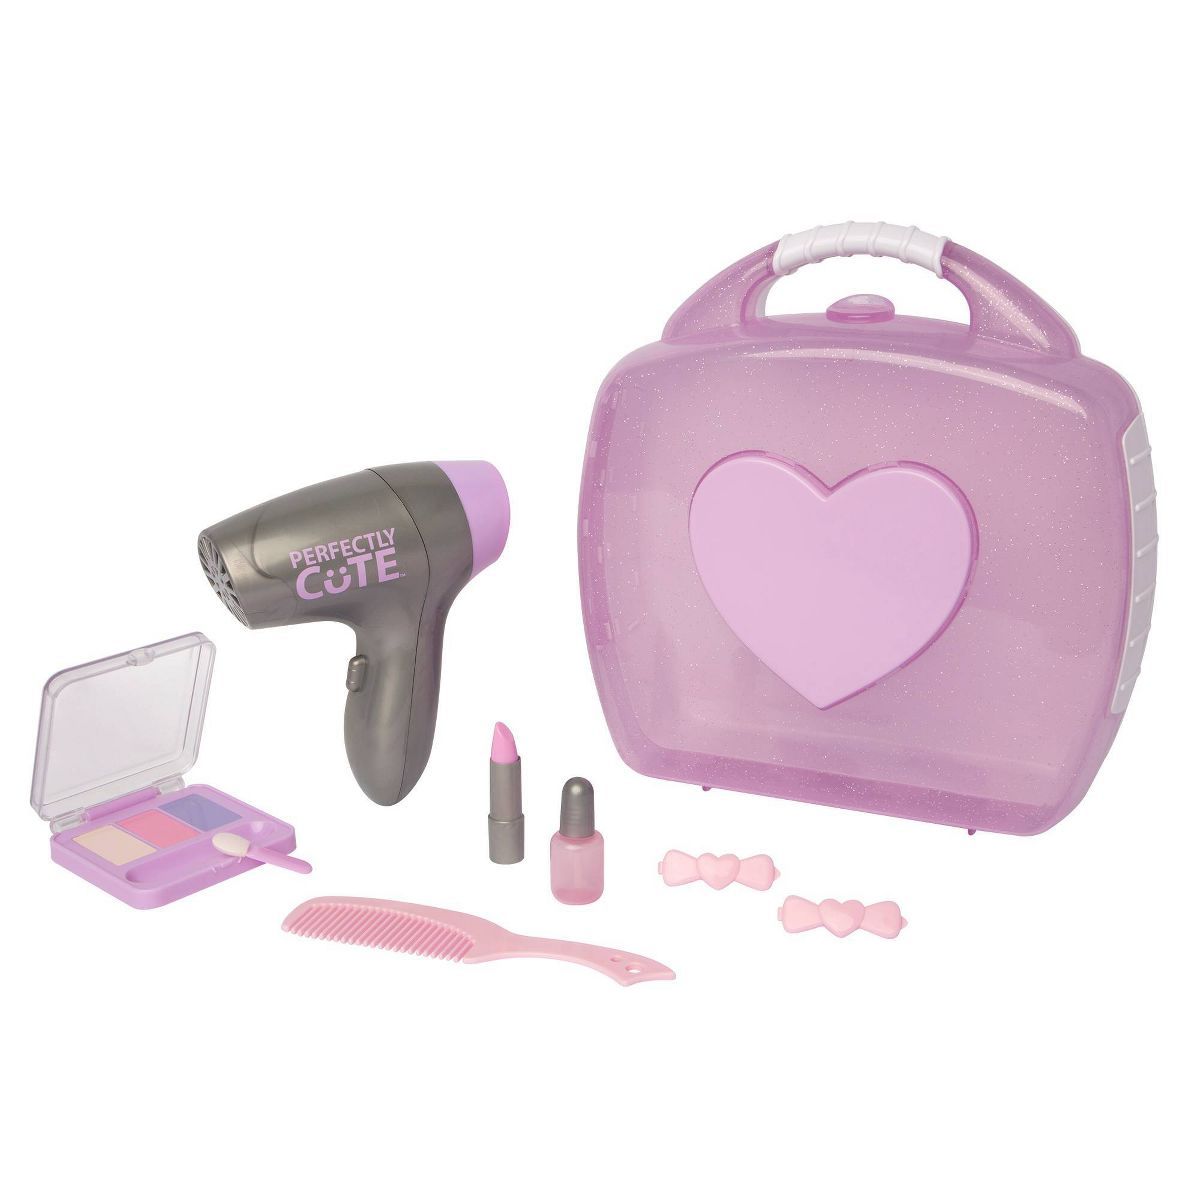 Perfectly Cute Glamour Kit | Target